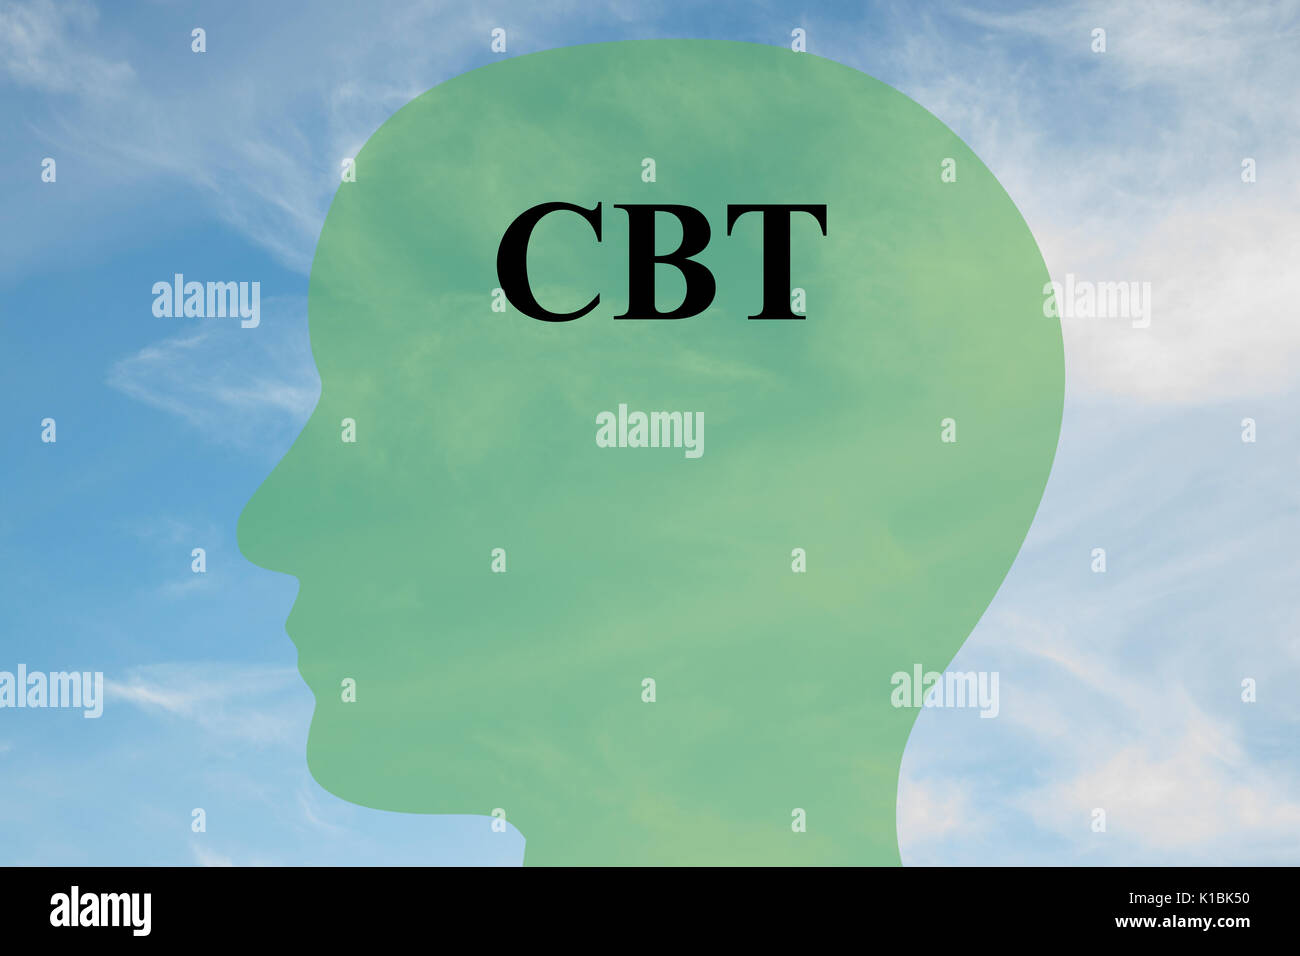 Render illustration of CBT script on head silhouette, with cloudy sky as a background. Human mentality concept. Stock Photo